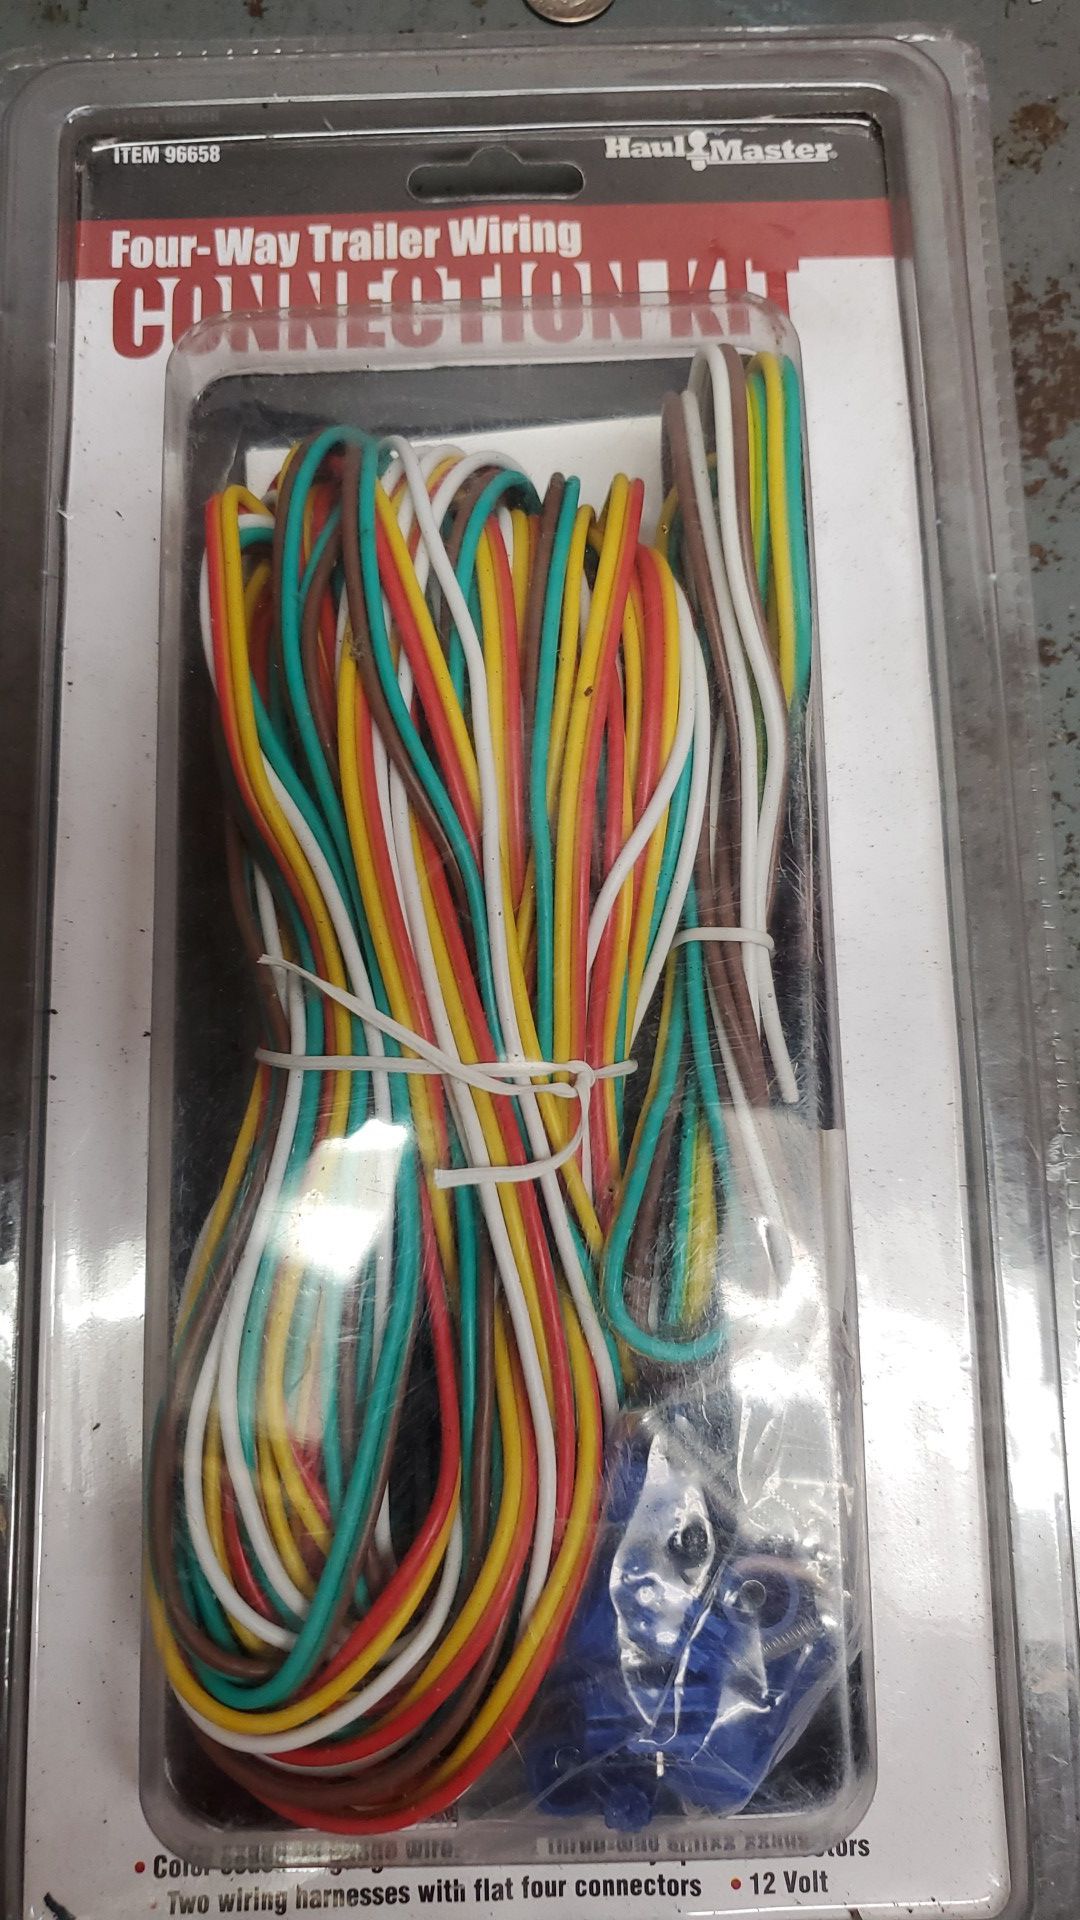 Four way connection kit